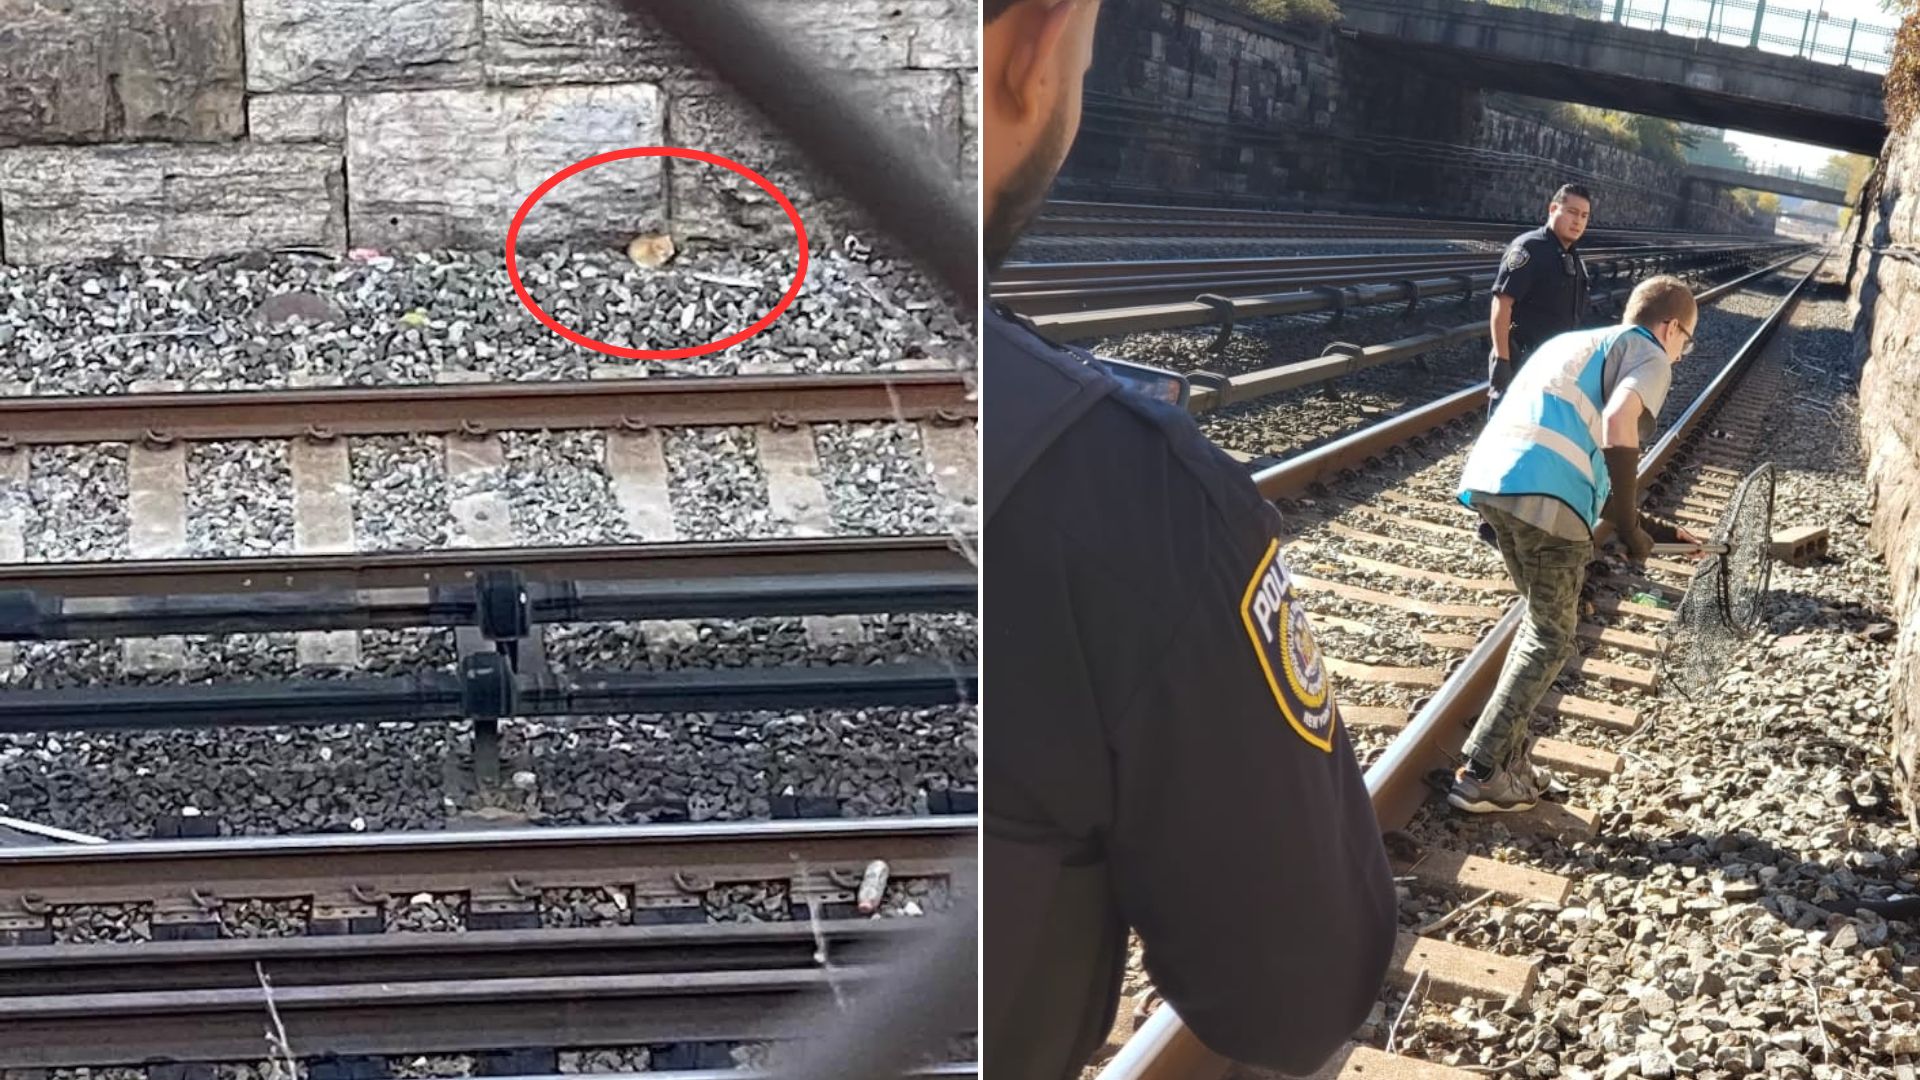 Passenger Hears Loud Cries Coming From Train Tracks, Then Comes To A Shocking Realization